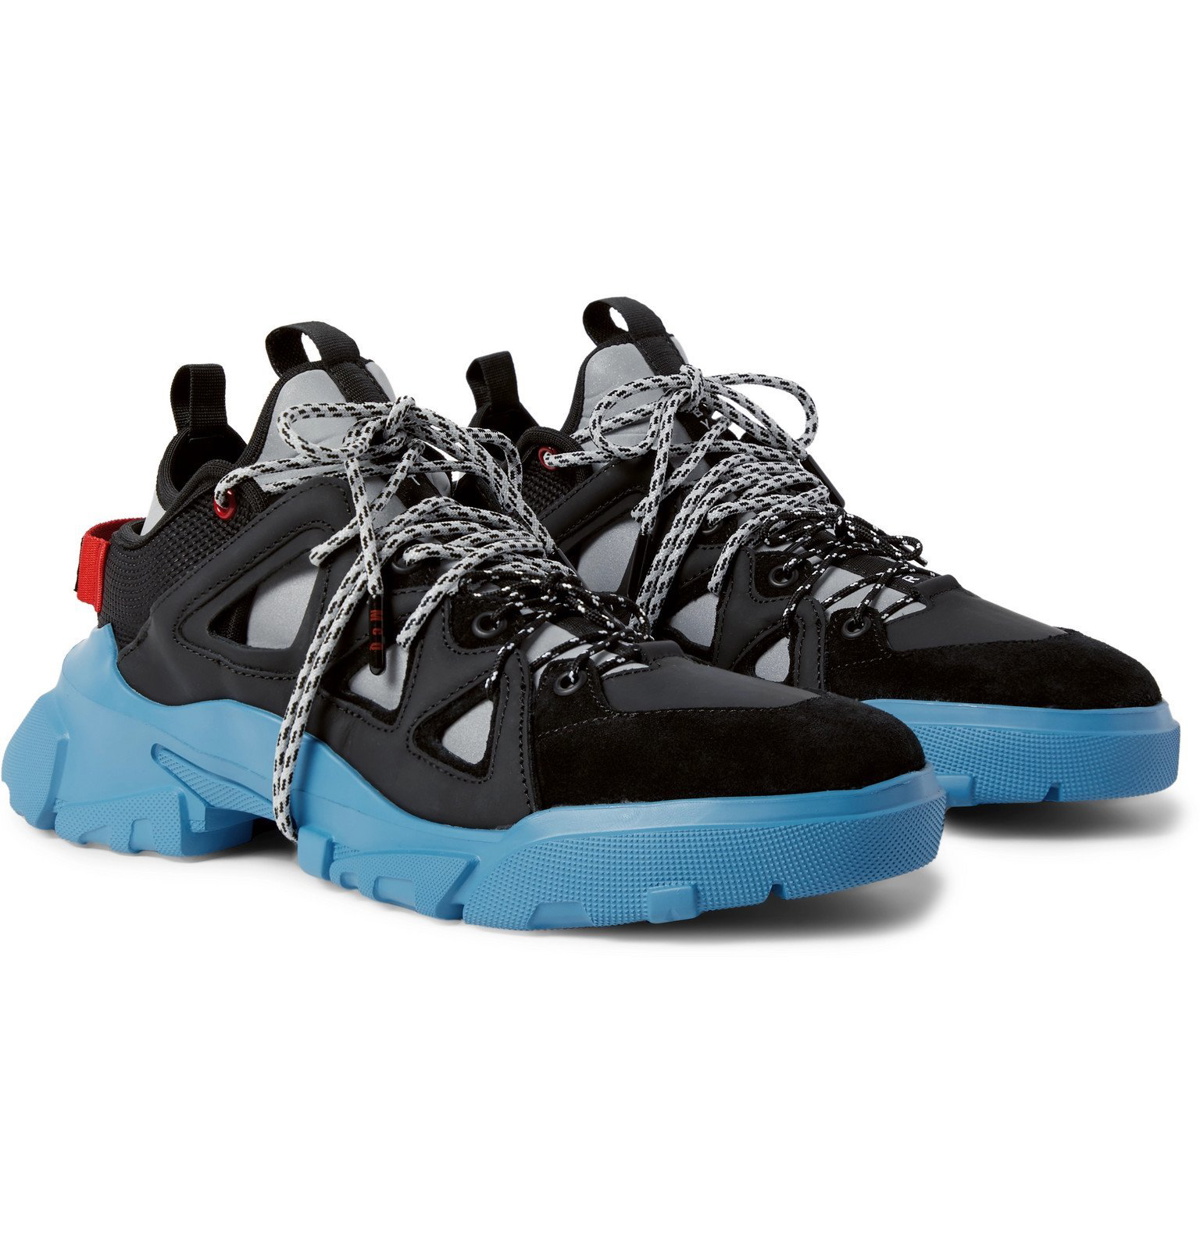 McQ Alexander McQueen - Orbyt Suede, Leather and Neoprene Sneakers - Blue McQ Alexander